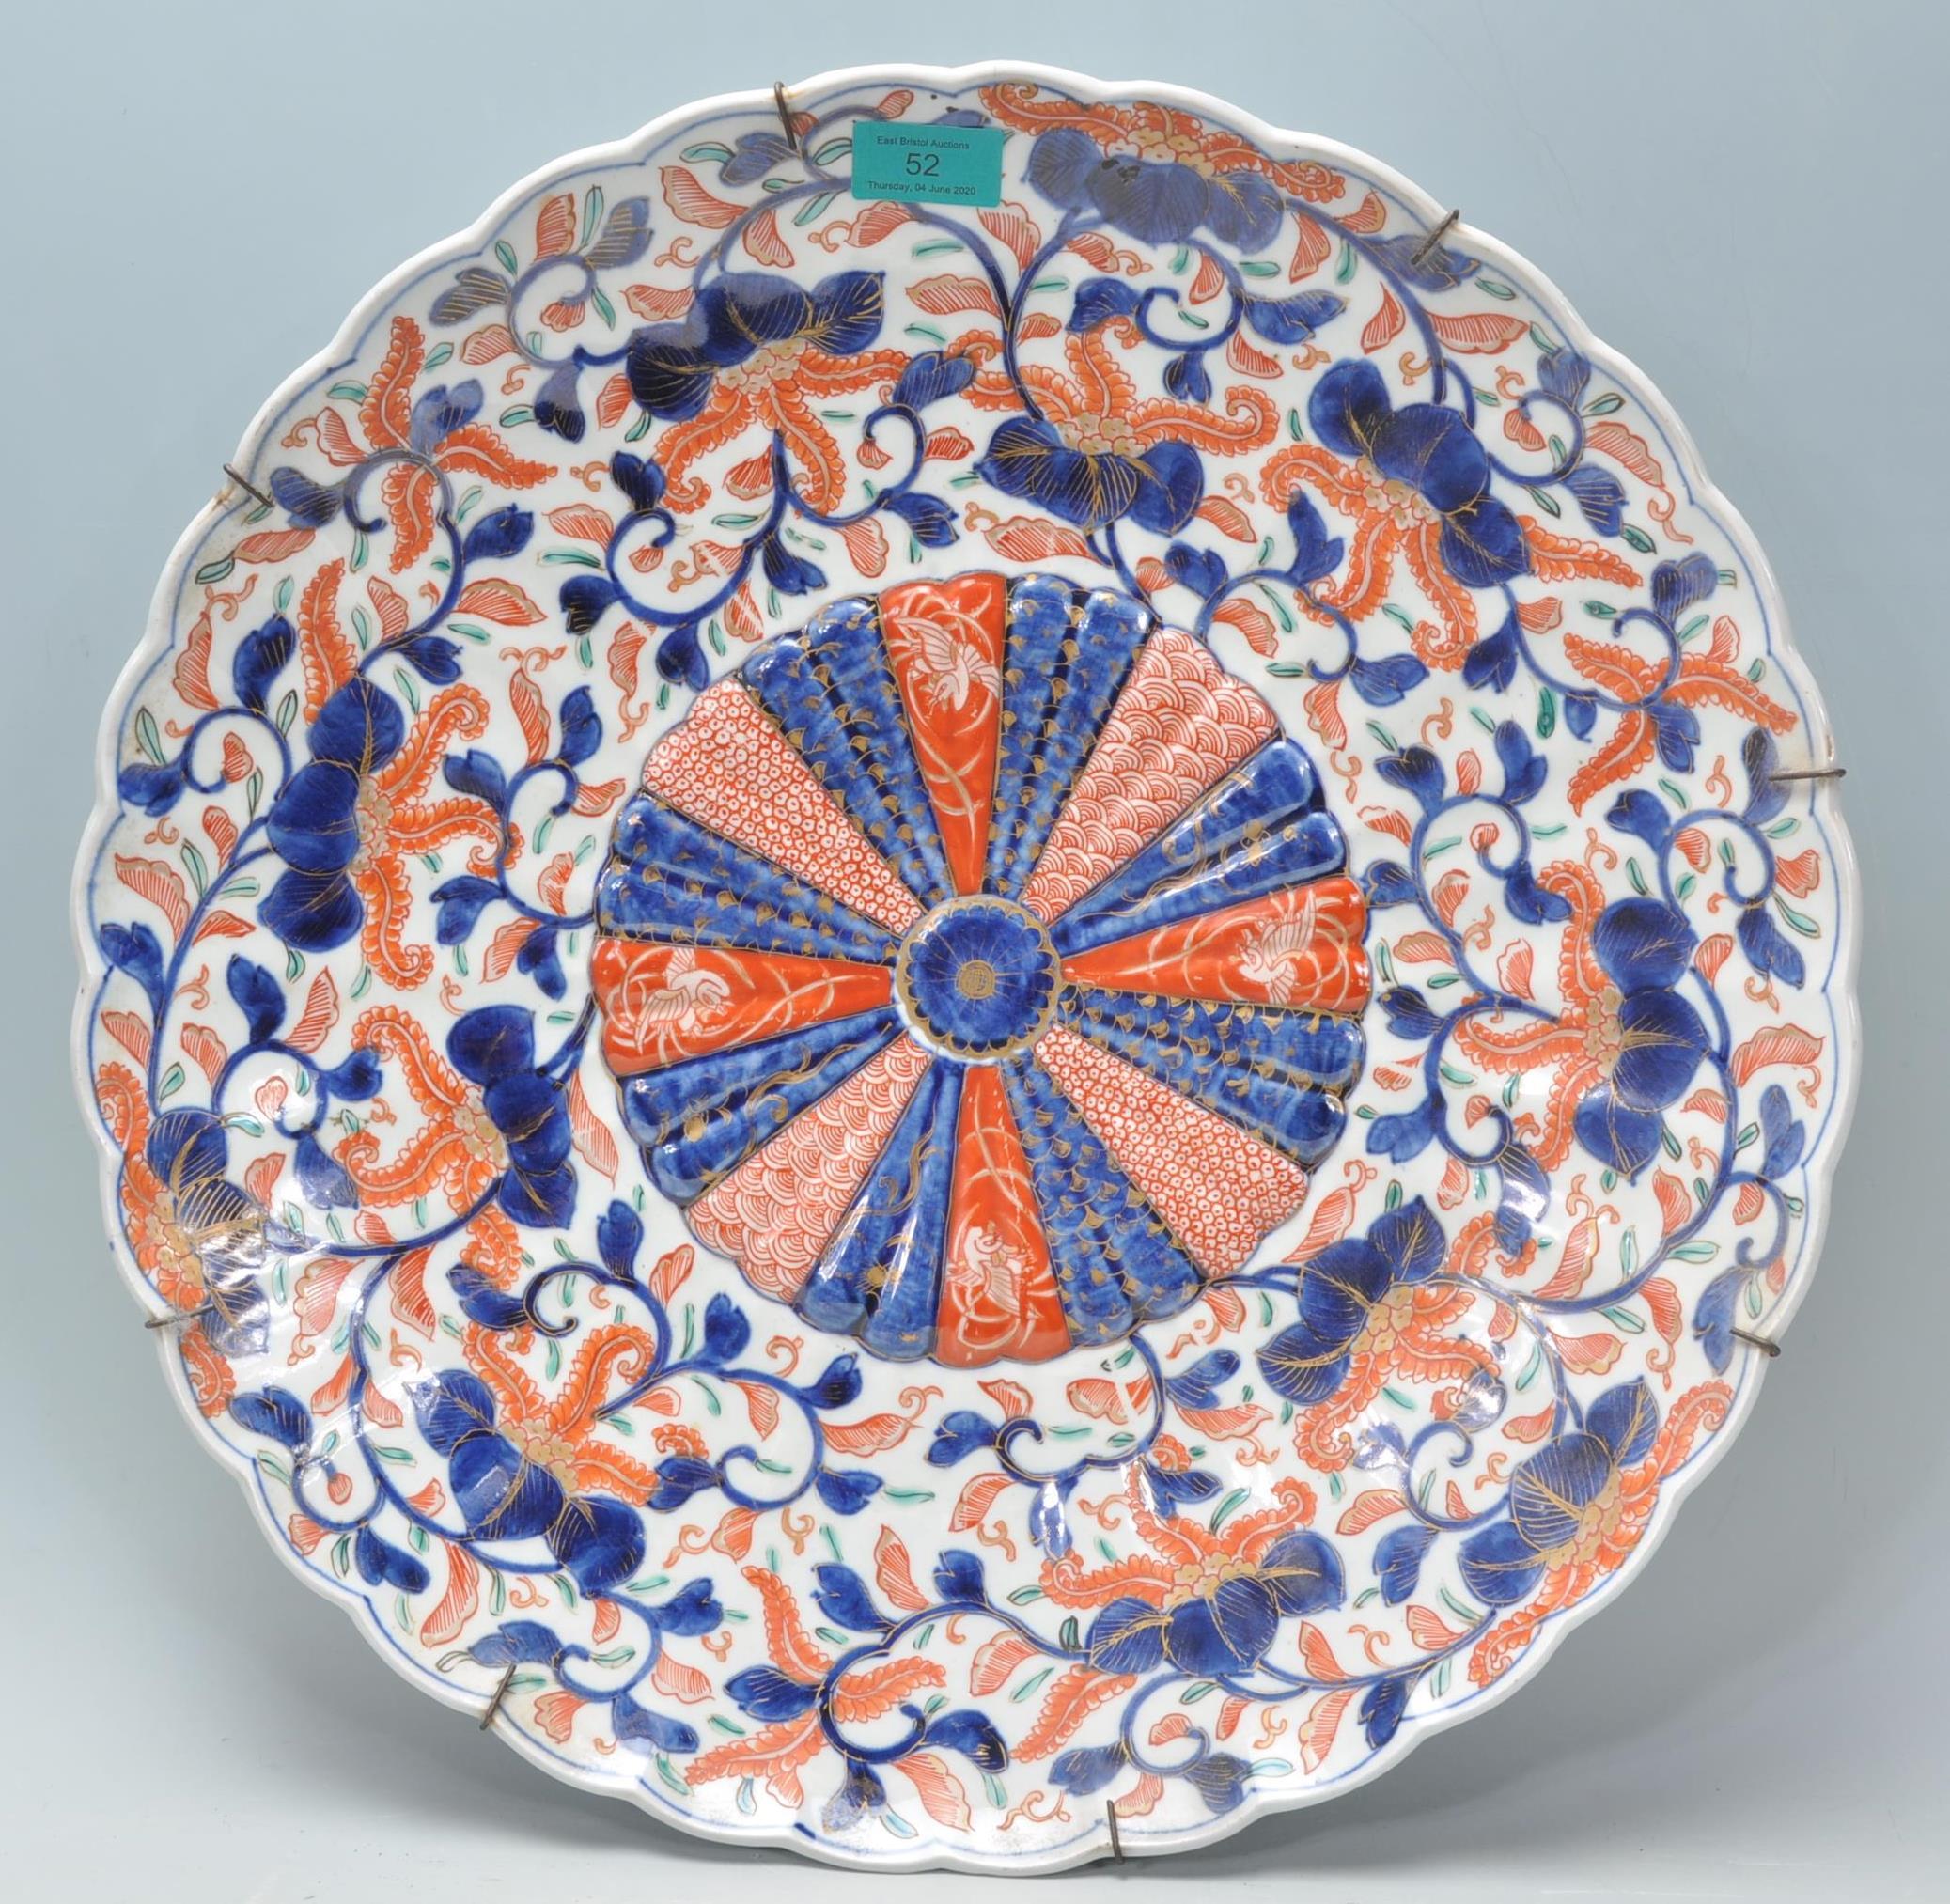 A 19th century Chinese Imari pattern wall charger of bowled form having geometric central swirl